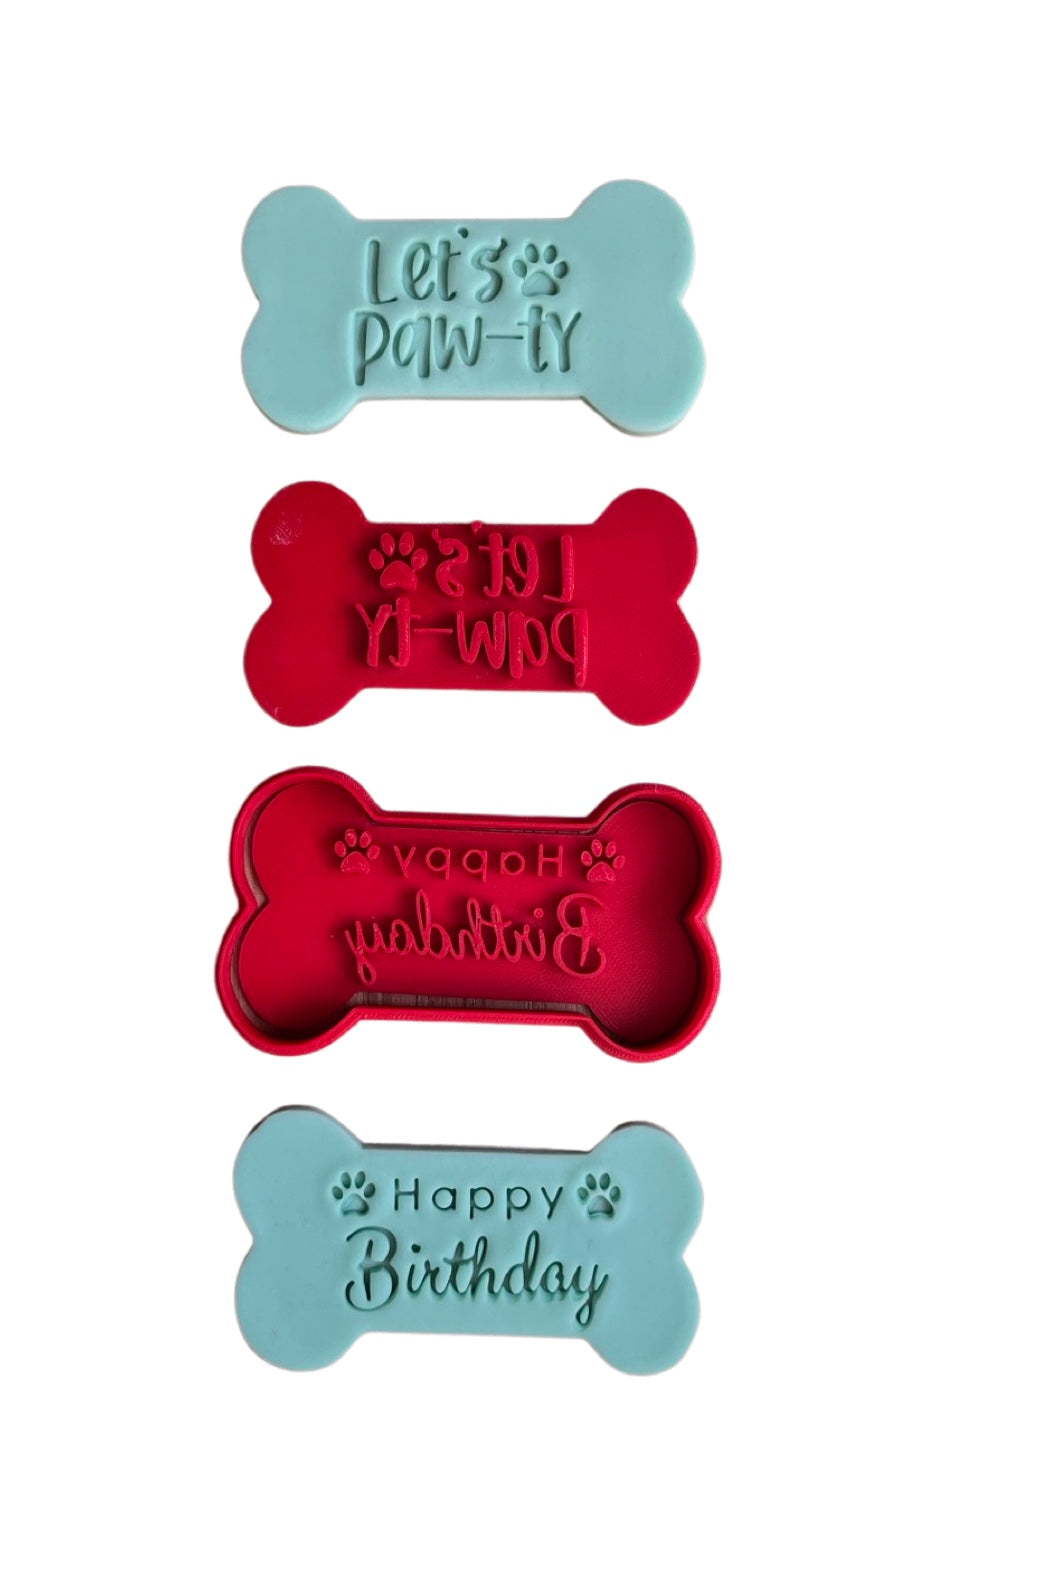 Dog bone cookie stamp cake fondant embosser - Let's paw-ty, and Happy birthday stamp, paw cutter